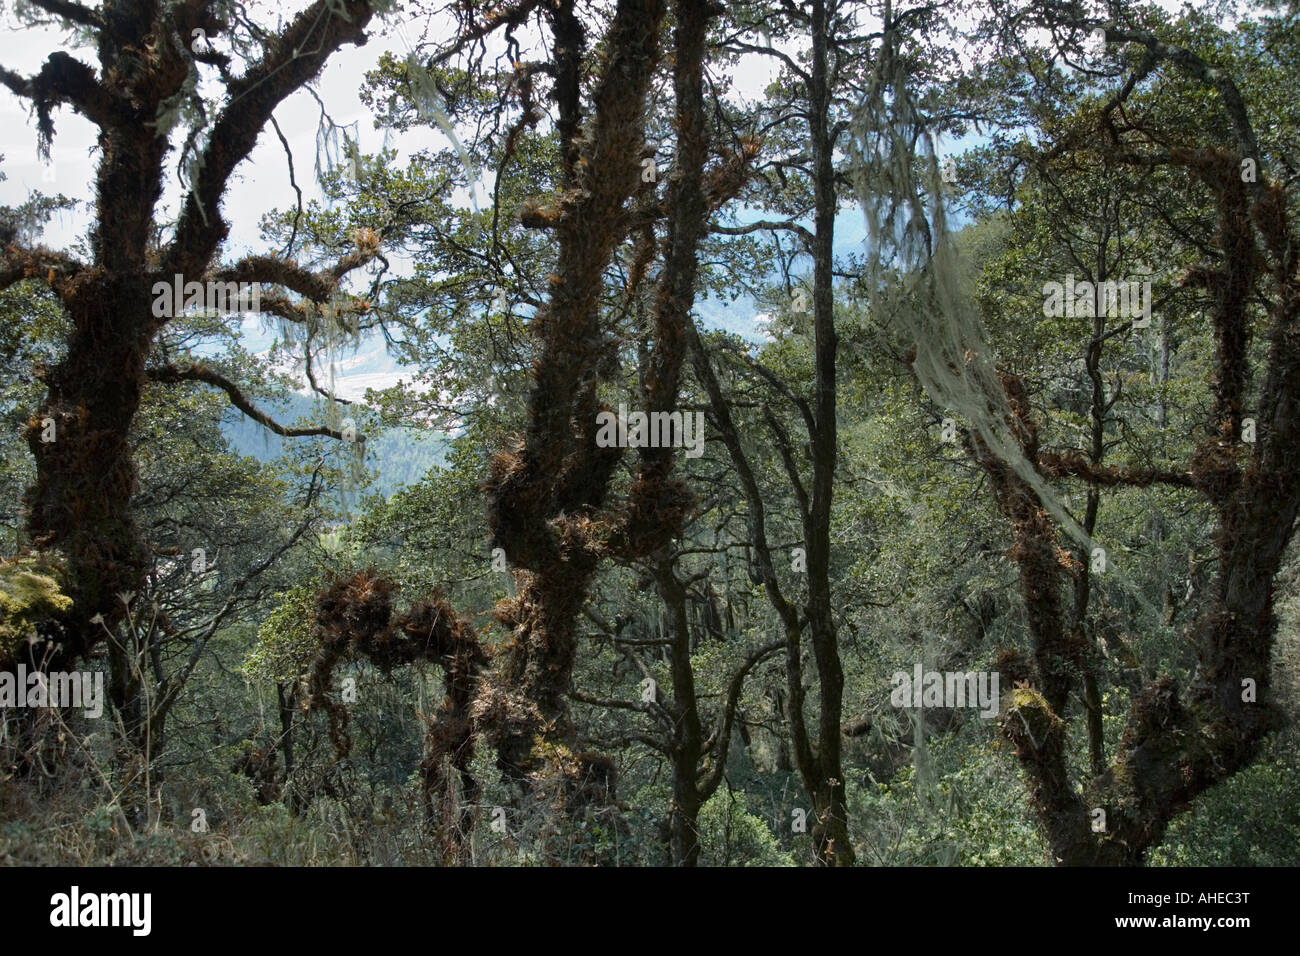 A view through lush forest canopy rich in ferns lichens and epiphytes near Taktshang monastery Bhutan. Stock Photo